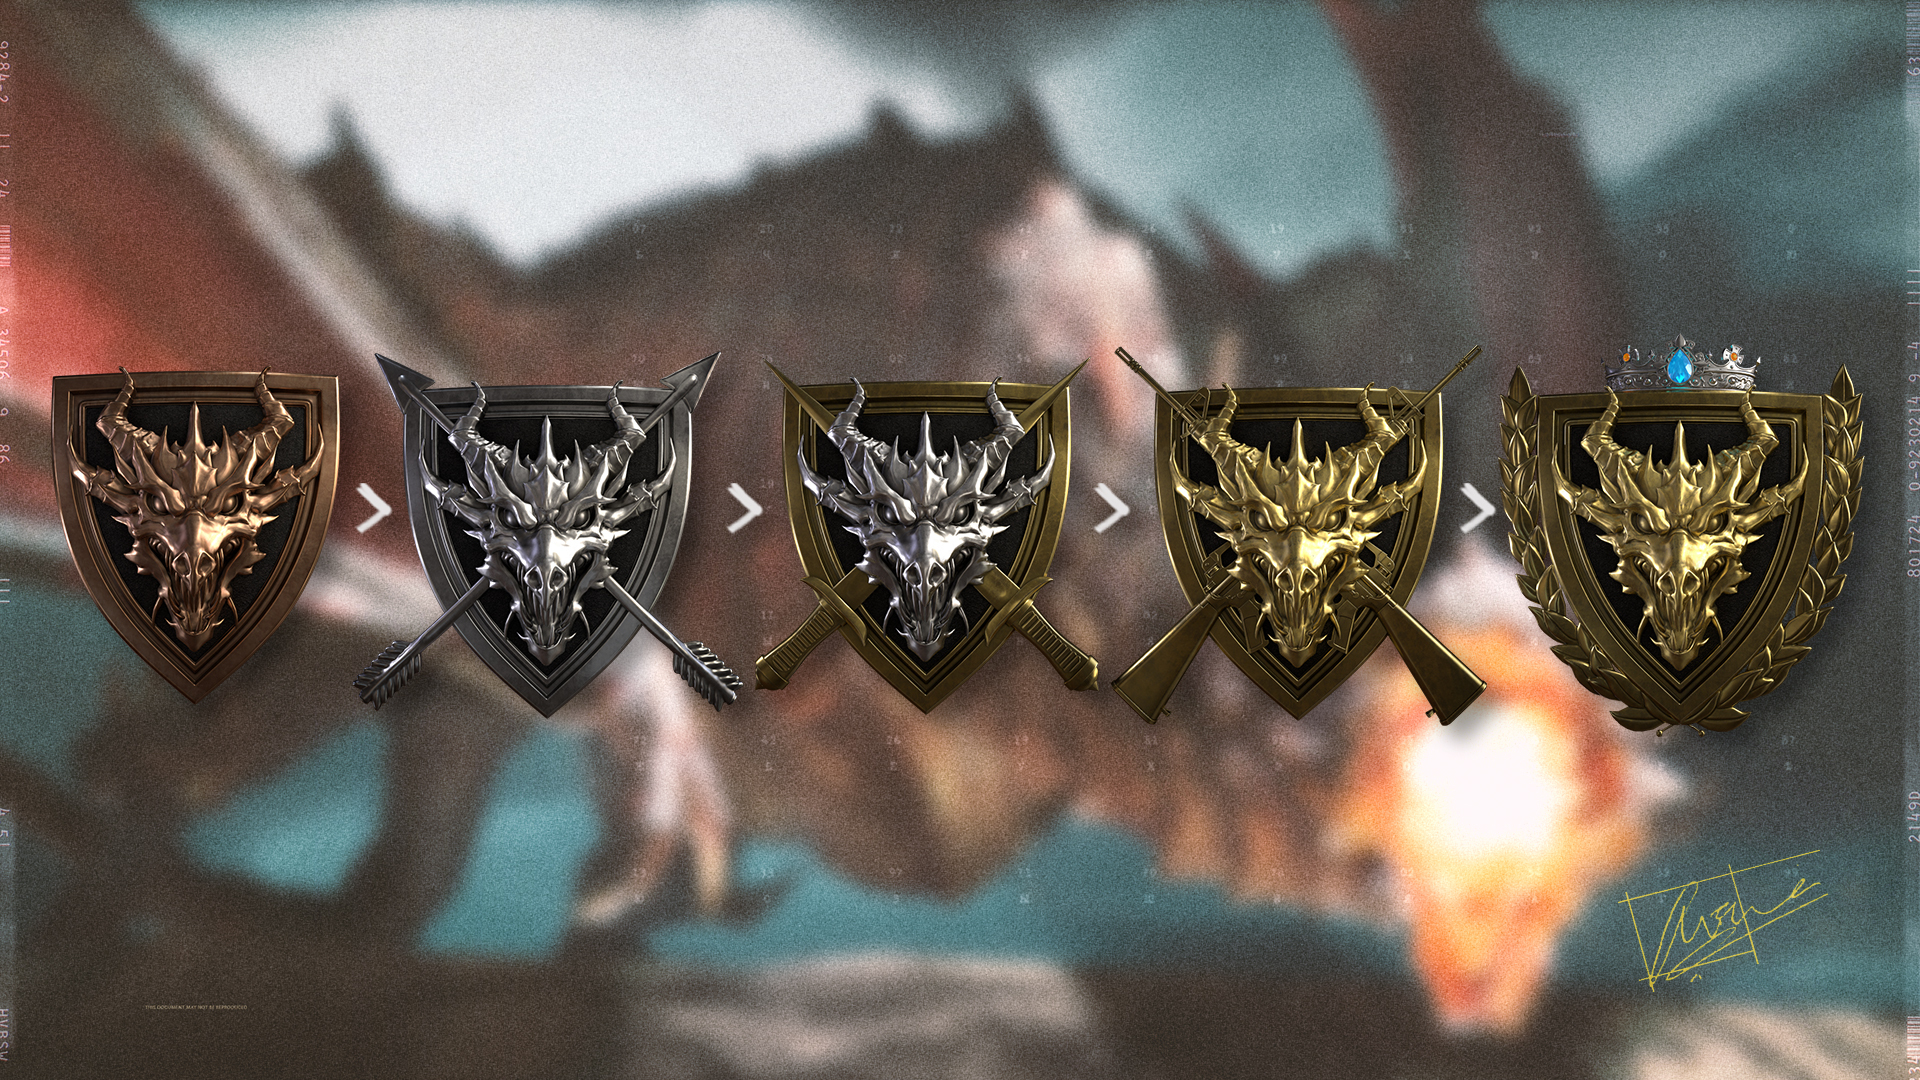 Call of Duty Black Ops Cold War ranked league play: The five rank badges from Black Ops Cold War League Play.